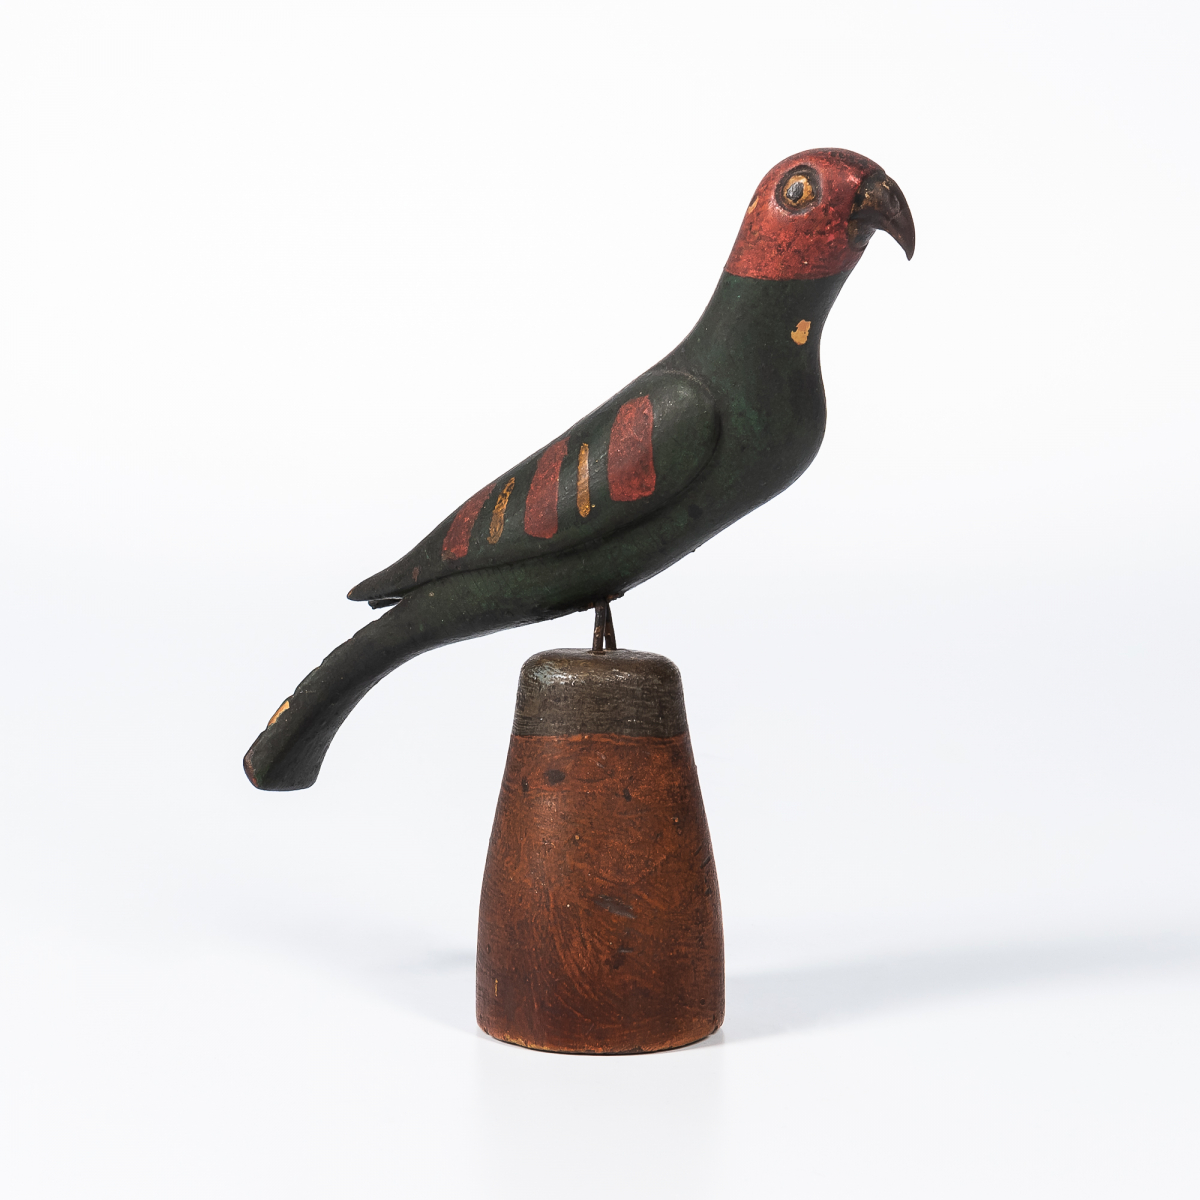 Large Simmons Folk Art Carved and Painted Parrot, Pennsylvania, 19th century